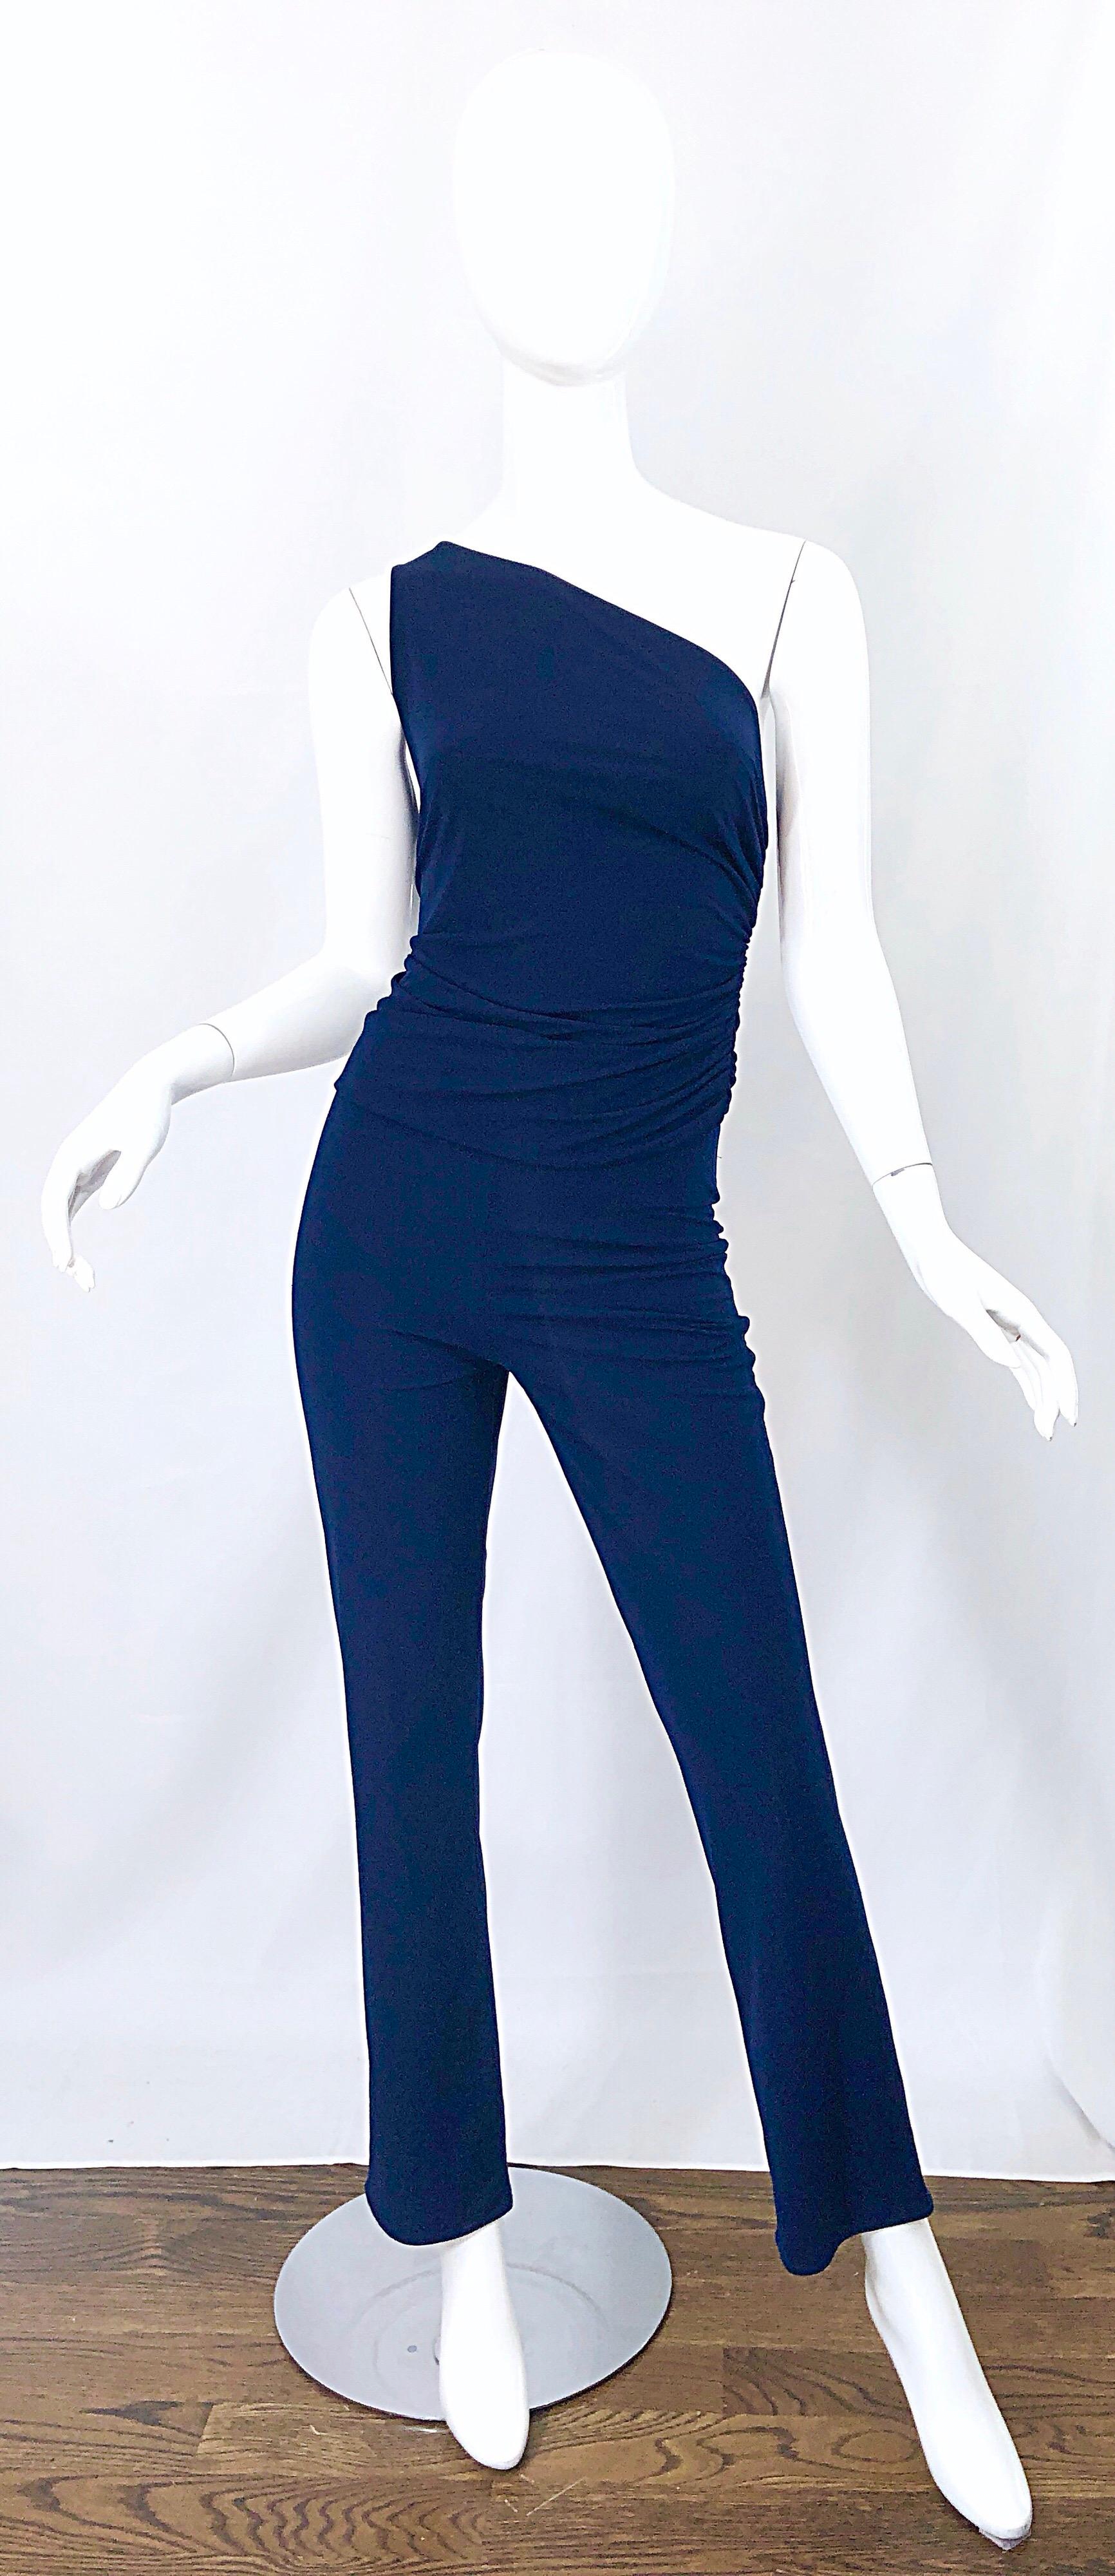 Amazing vintage NORMA KAMALI OMO early 1980s navy blue one shoulder top and trosuers! Looks like a jumpsuit, but better! Soft stretch jersey stretches to fit, and the ruched details on the top is super flattering. Top simply slips over the head.